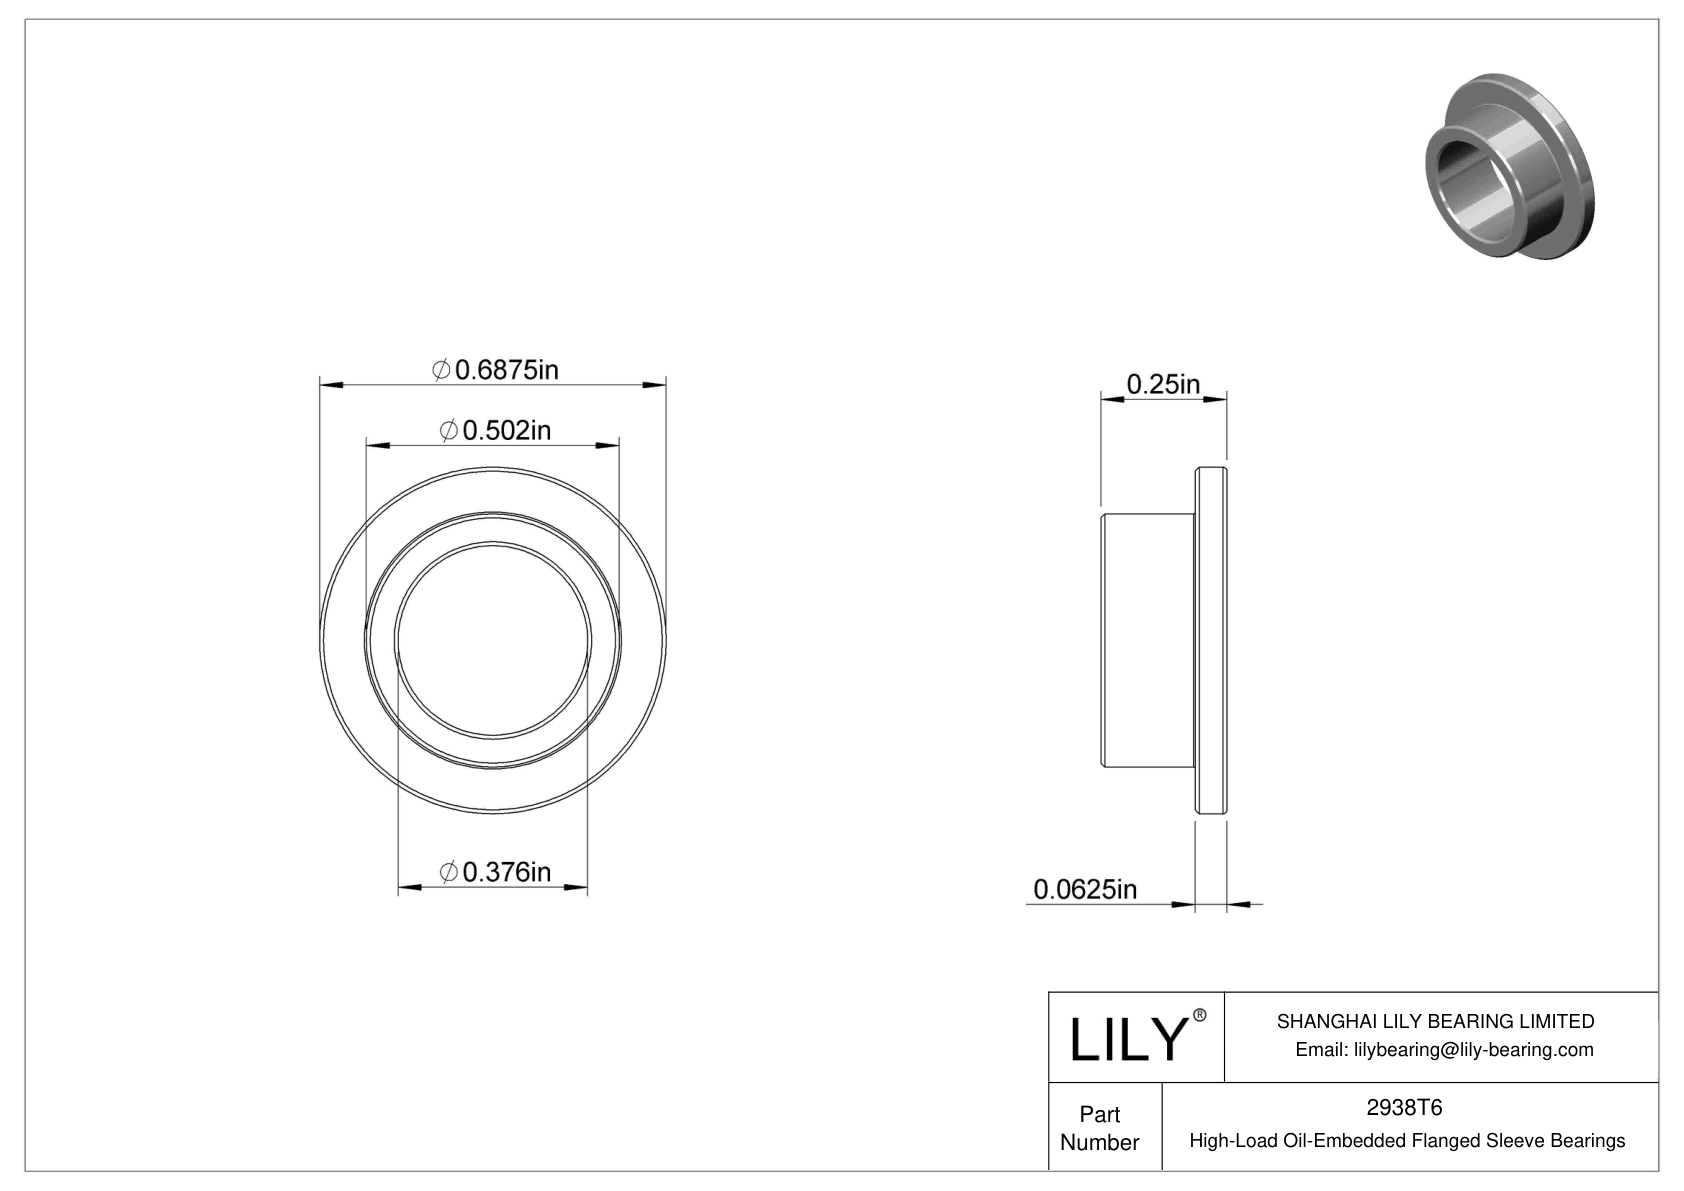 CJDITG High-Load Oil-Embedded Flanged Sleeve Bearings cad drawing